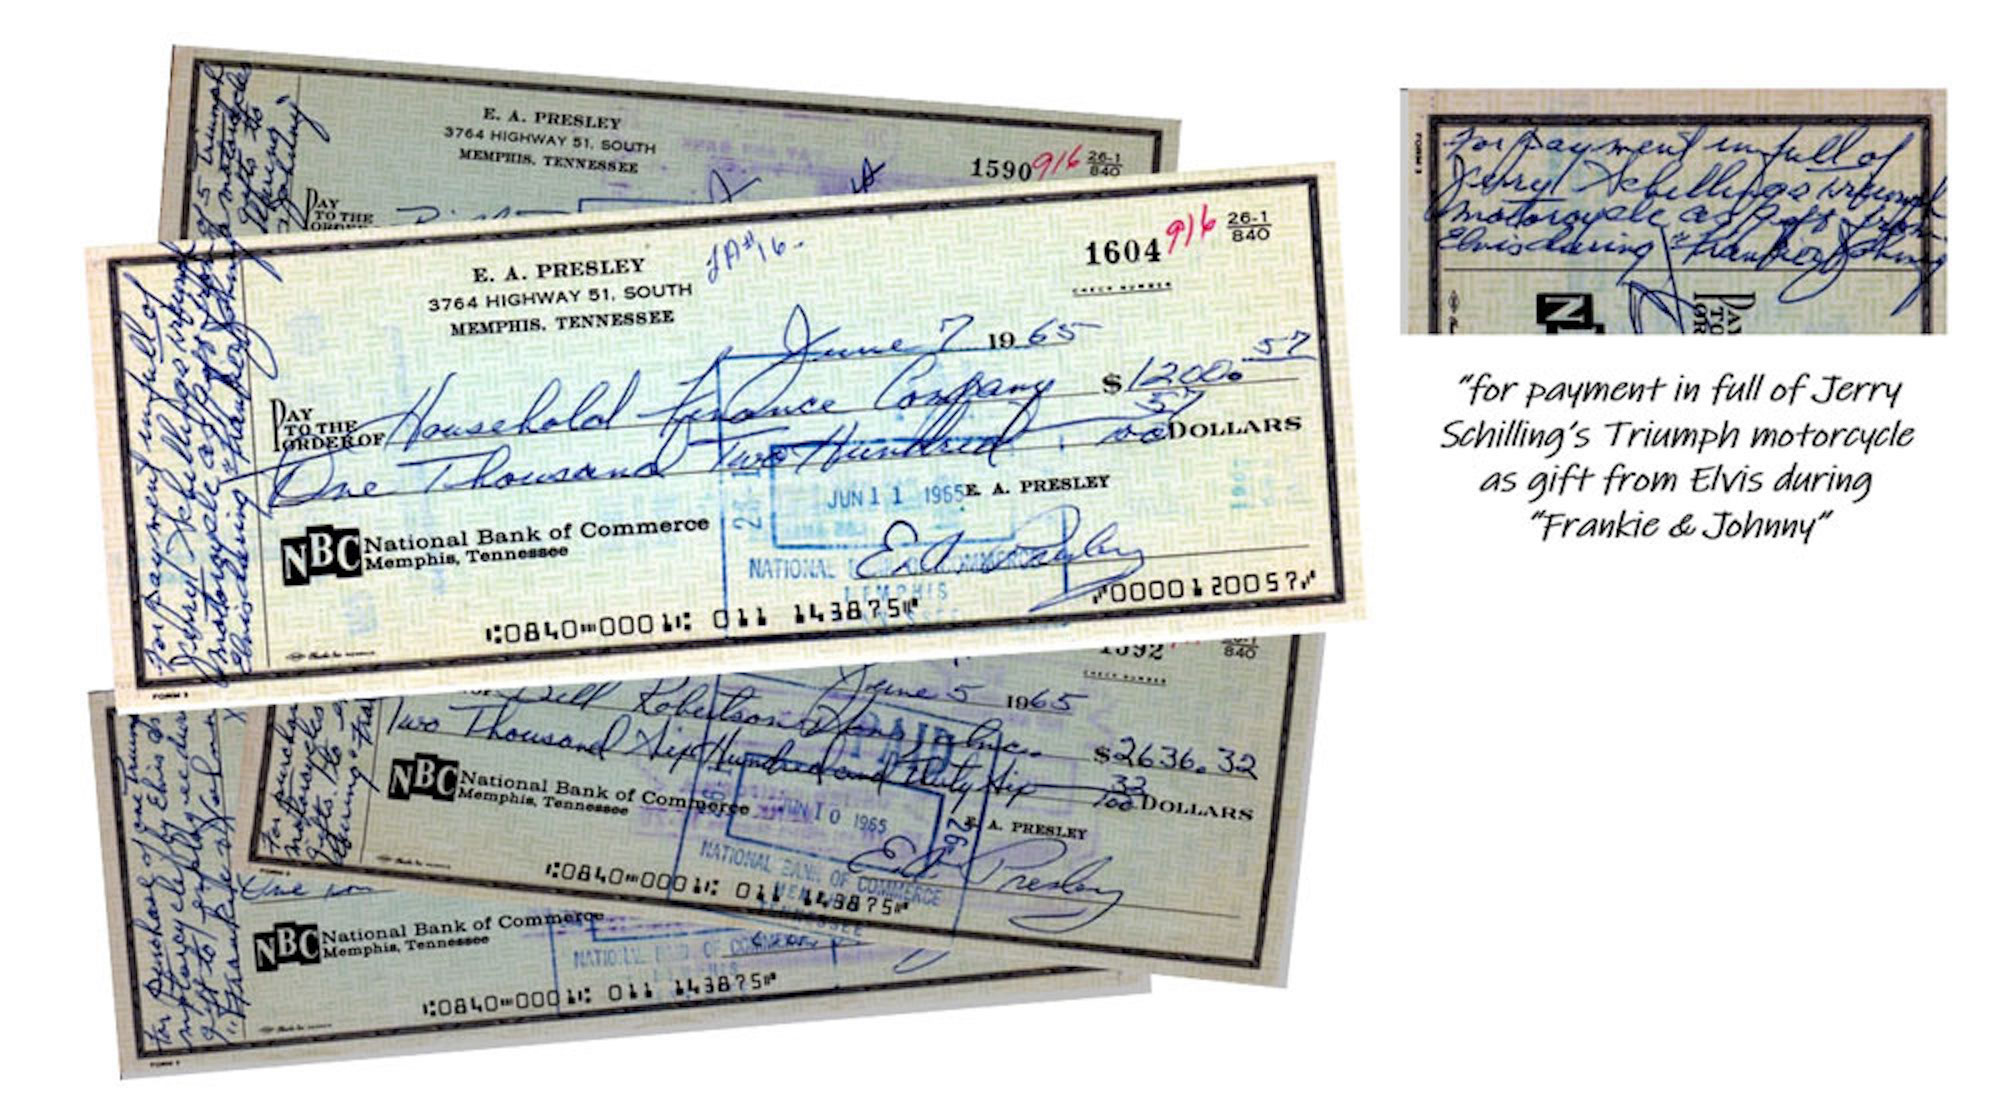 The original cheques that were found, proving that Elvis Presley bought nine Triumph motorcycles for his friends in the year 1965. Media provided by Triumph.